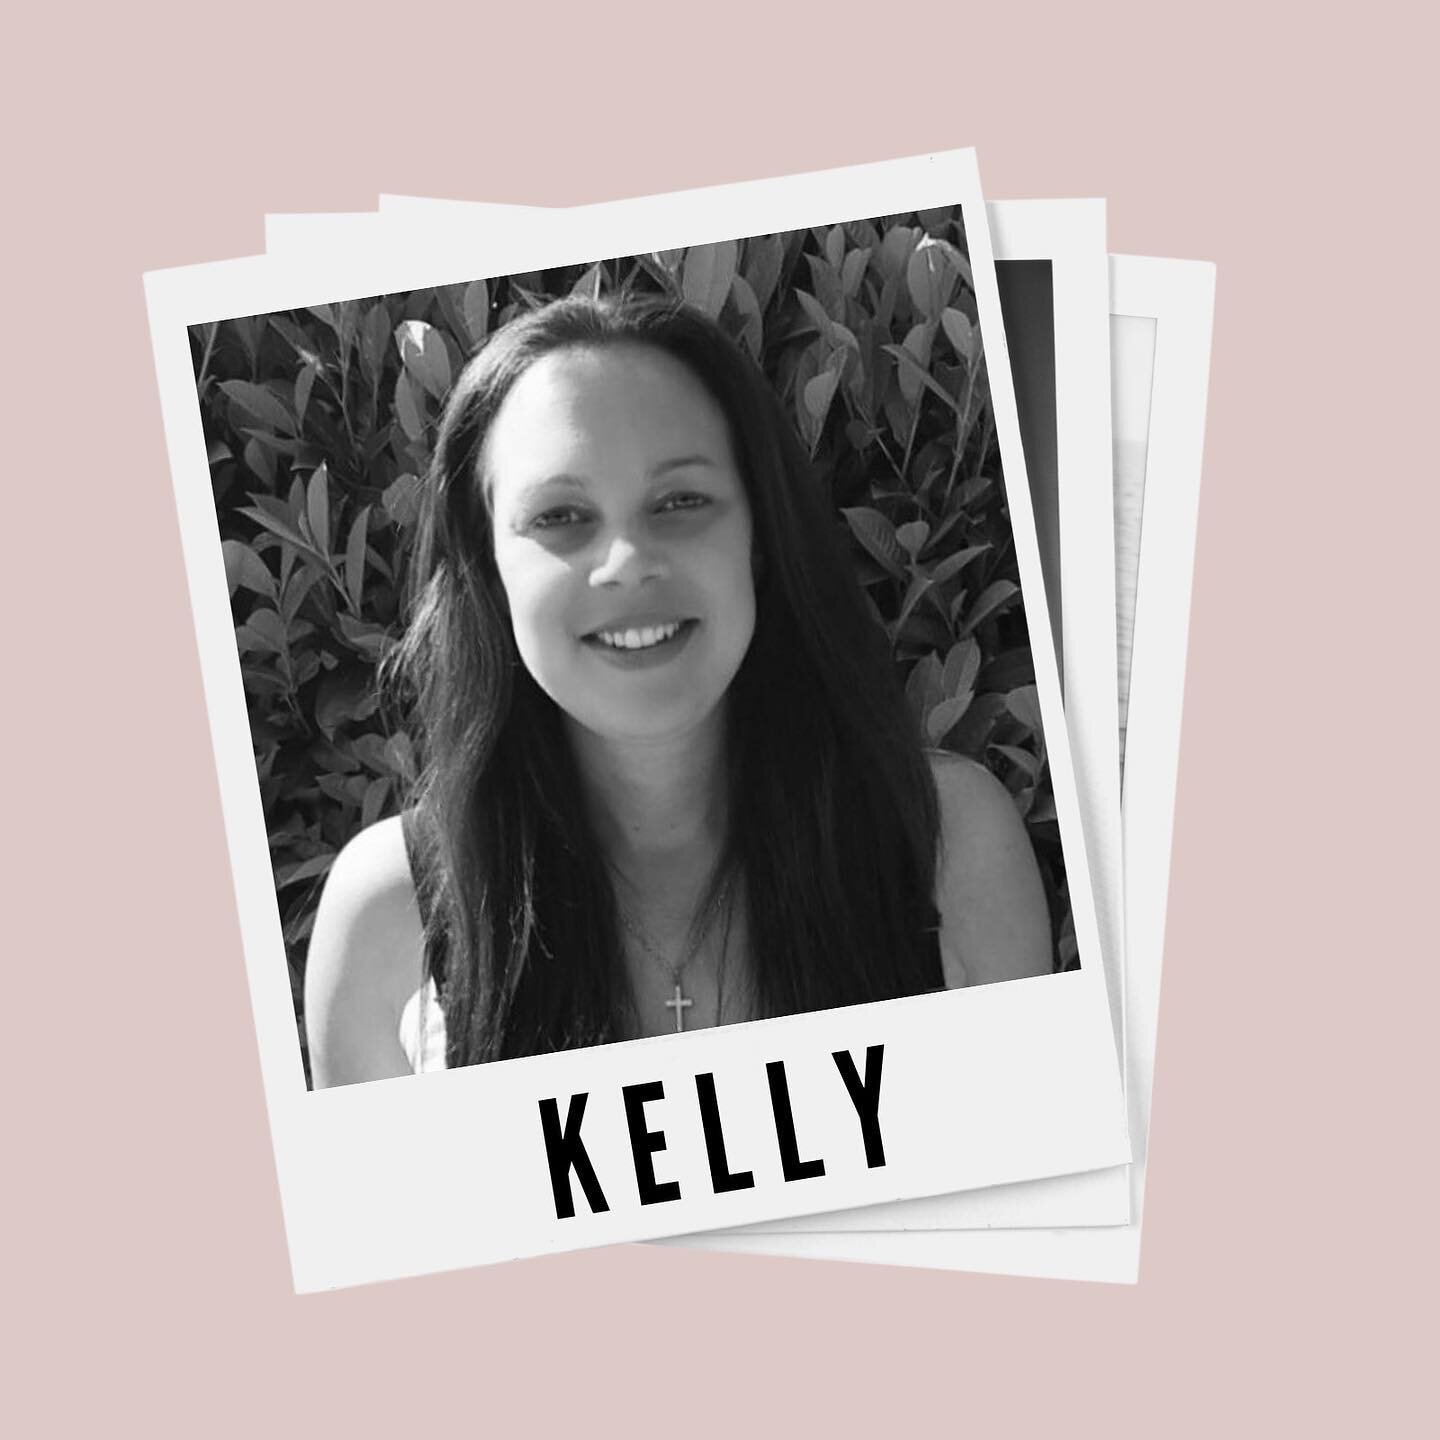 A vital part of our team here at Oasis hair studio, Kelly has been welcoming clients through the door for 17 years now! ✨

A much loved member of the team with her warm and friendly approach to all of our clients &amp; oasis family. 

Kelly splits he